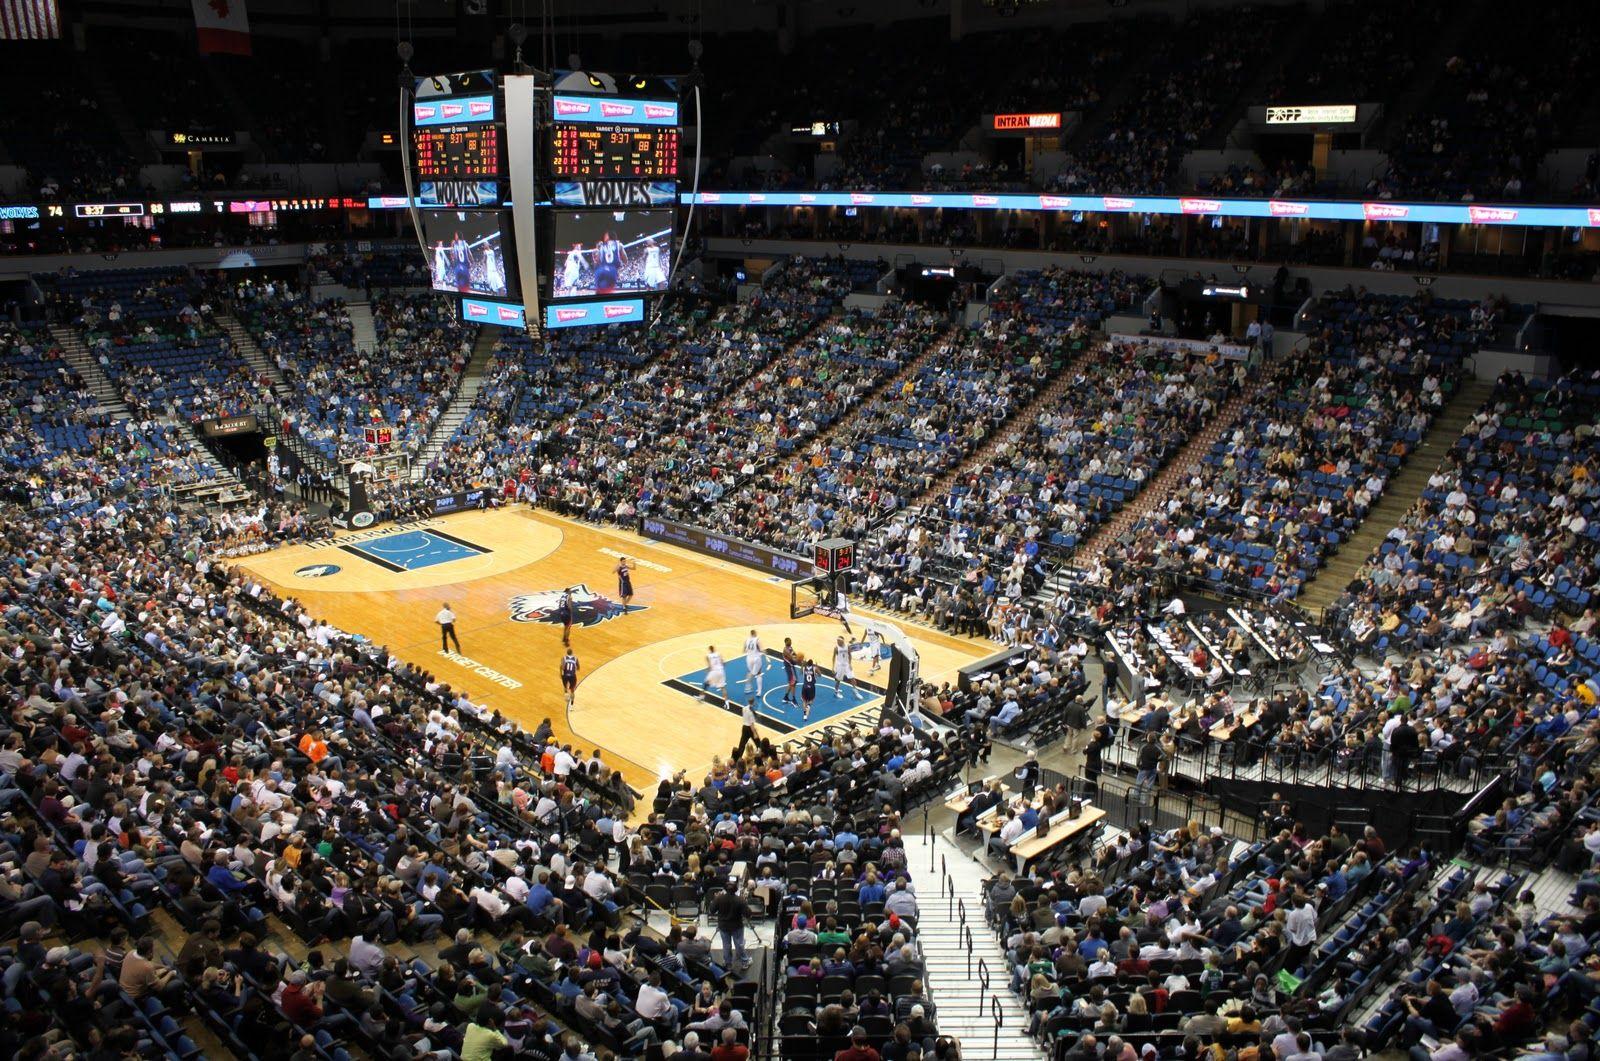 NBA Finals: TBD at Minnesota Timberwolves (Home Game 3) (Date TBD) (If Necessary)